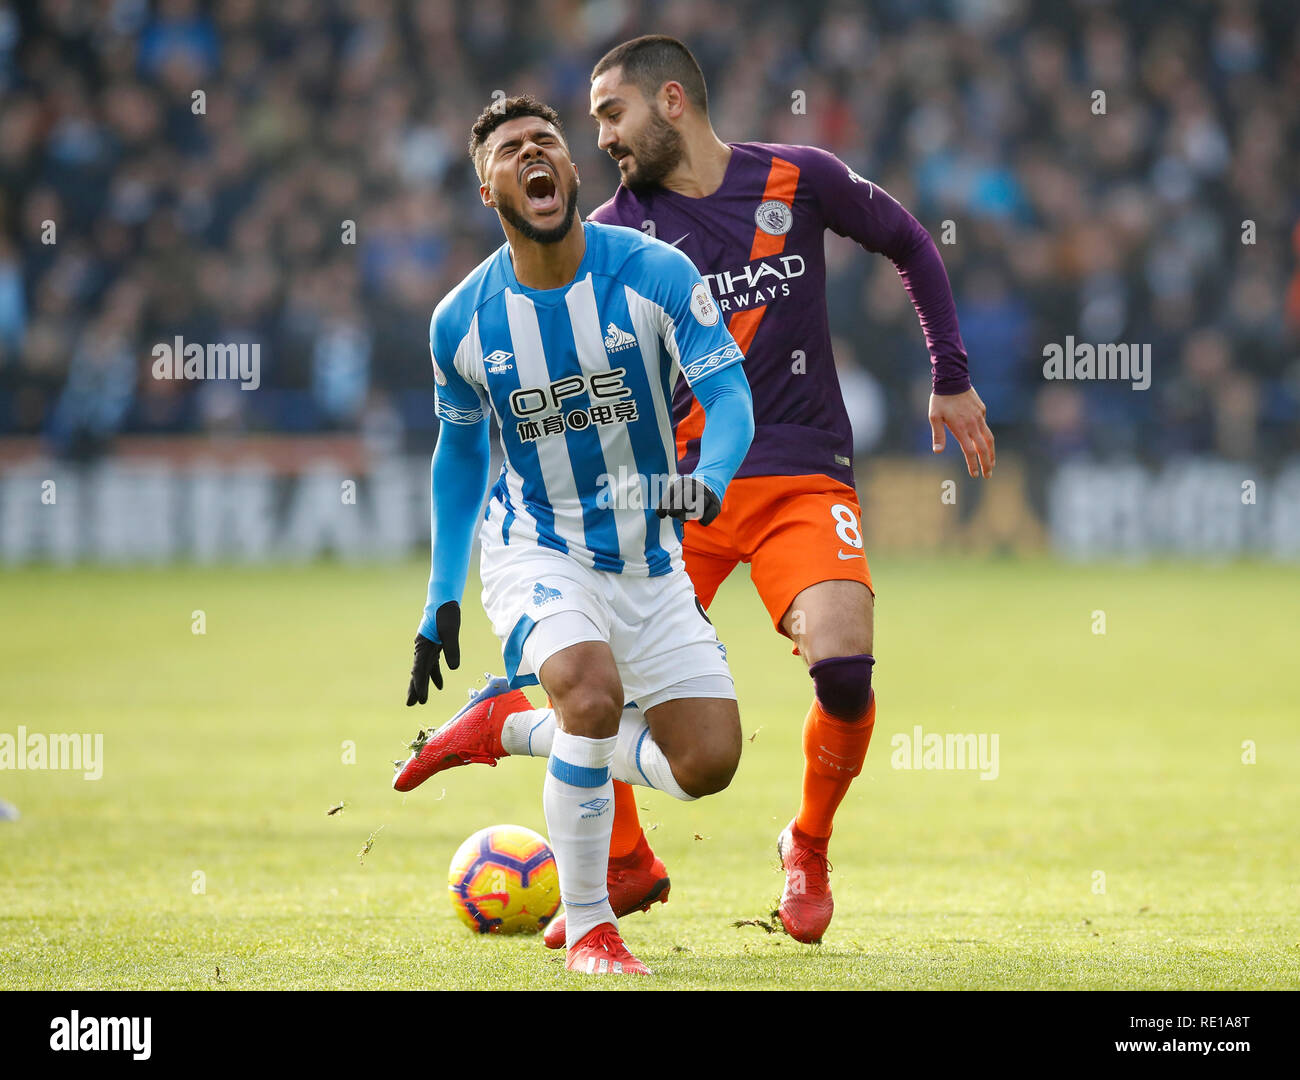 Huddersfield Town's Elias Kachunga (front) reacts in pain after a challenge bu Manchester City's Ilkay Gundogan during the Premier League match at The John Smith's Stadium, Huddersfield. Stock Photo